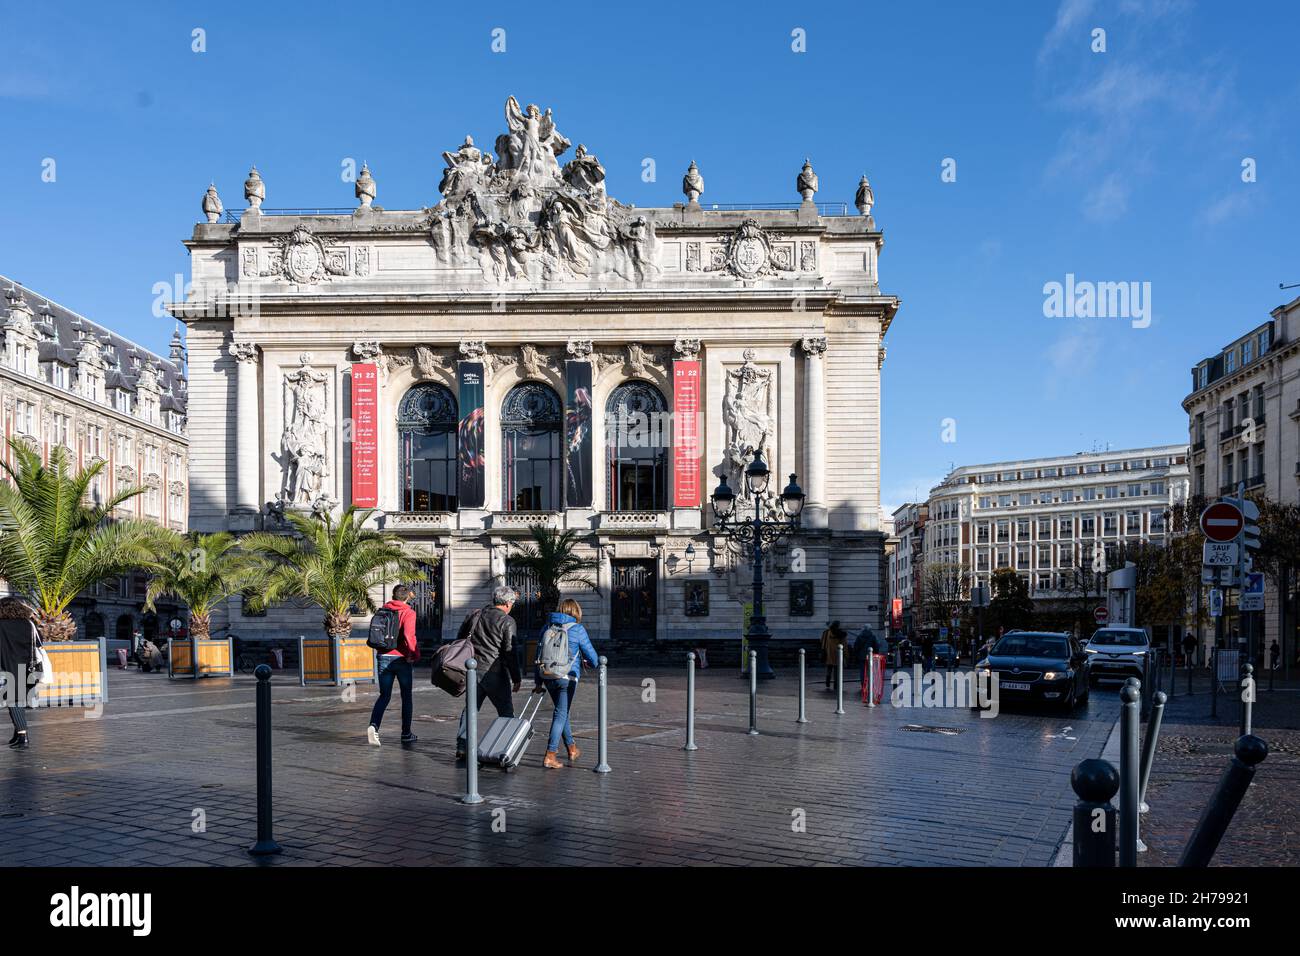 November 4, 2021 - Lille, France: La Grande Place, has a Flemish architecture similar to Belgium. Standing by the main square, La Grand Place, stands the Opera House built in neo-classical style Stock Photo